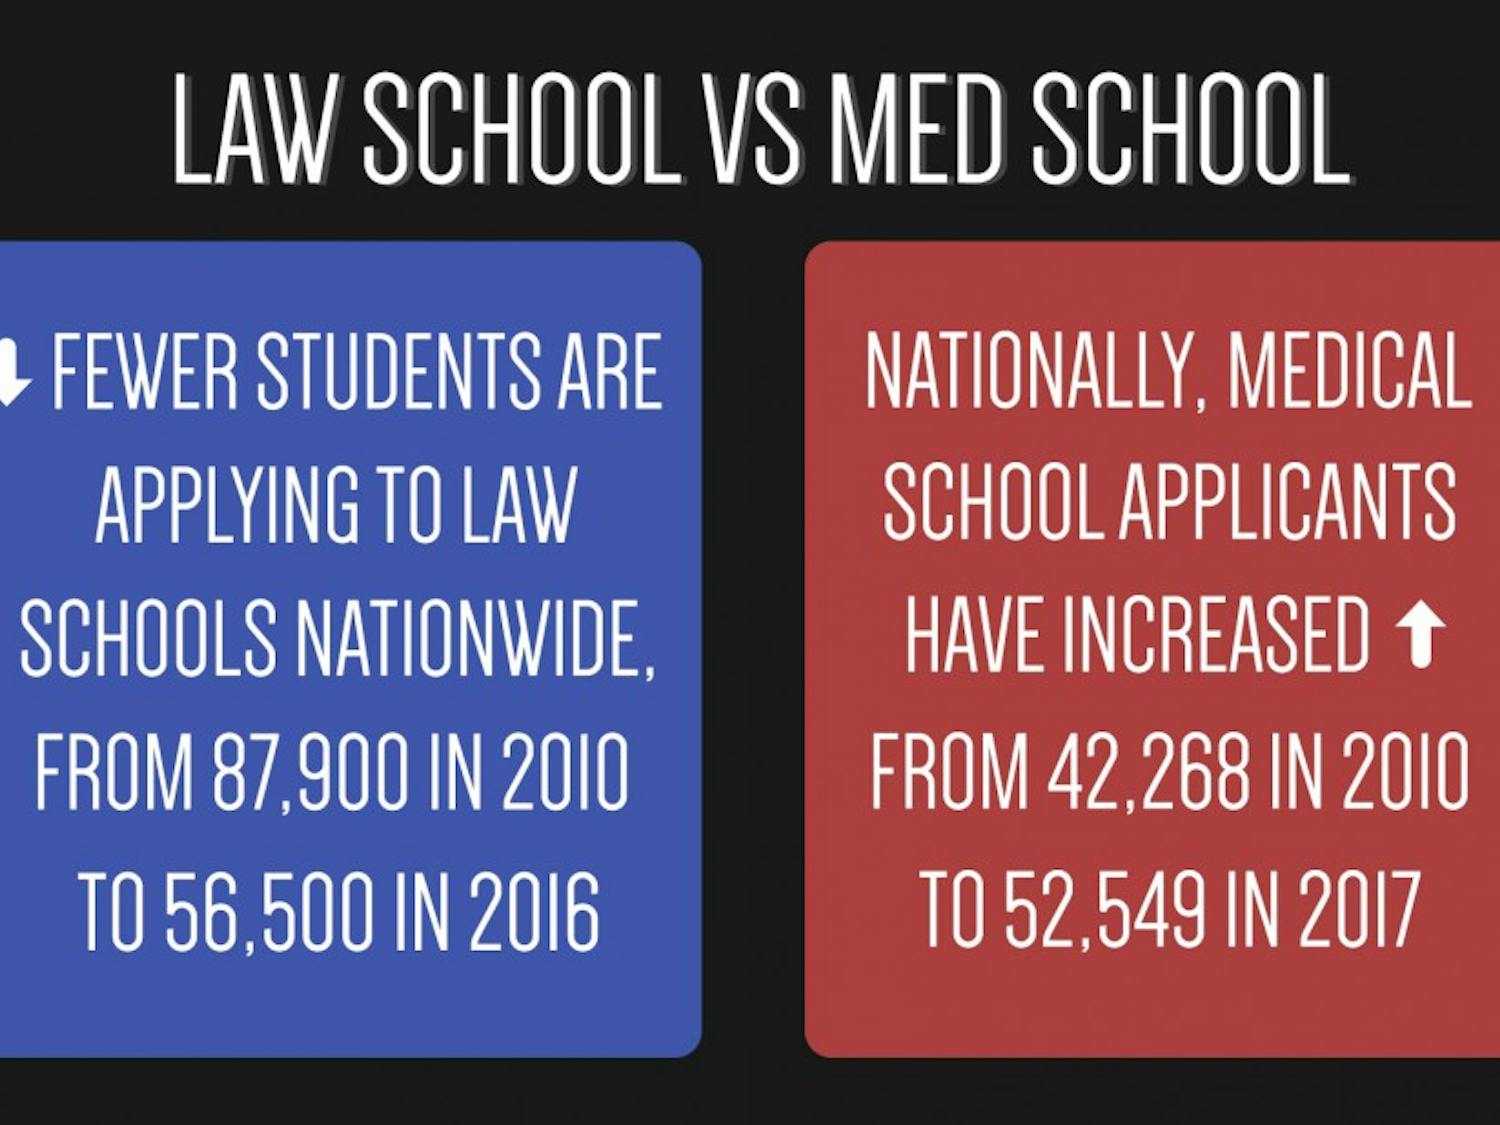 Despite nationwide trends, more undergraduates applied to law school in 2017 than in 2016.